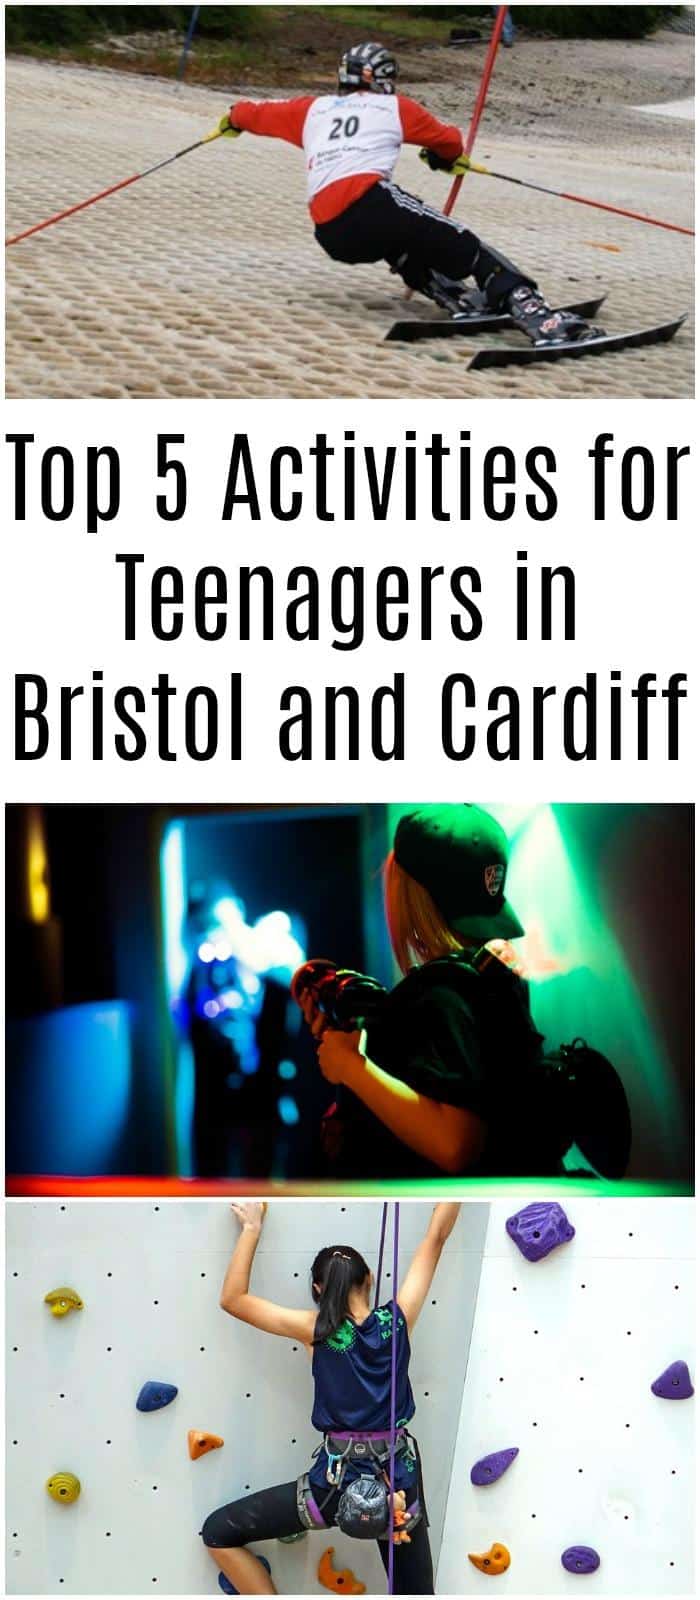 Our Top 5 Activities for Teenagers in Bristol and Cardiff